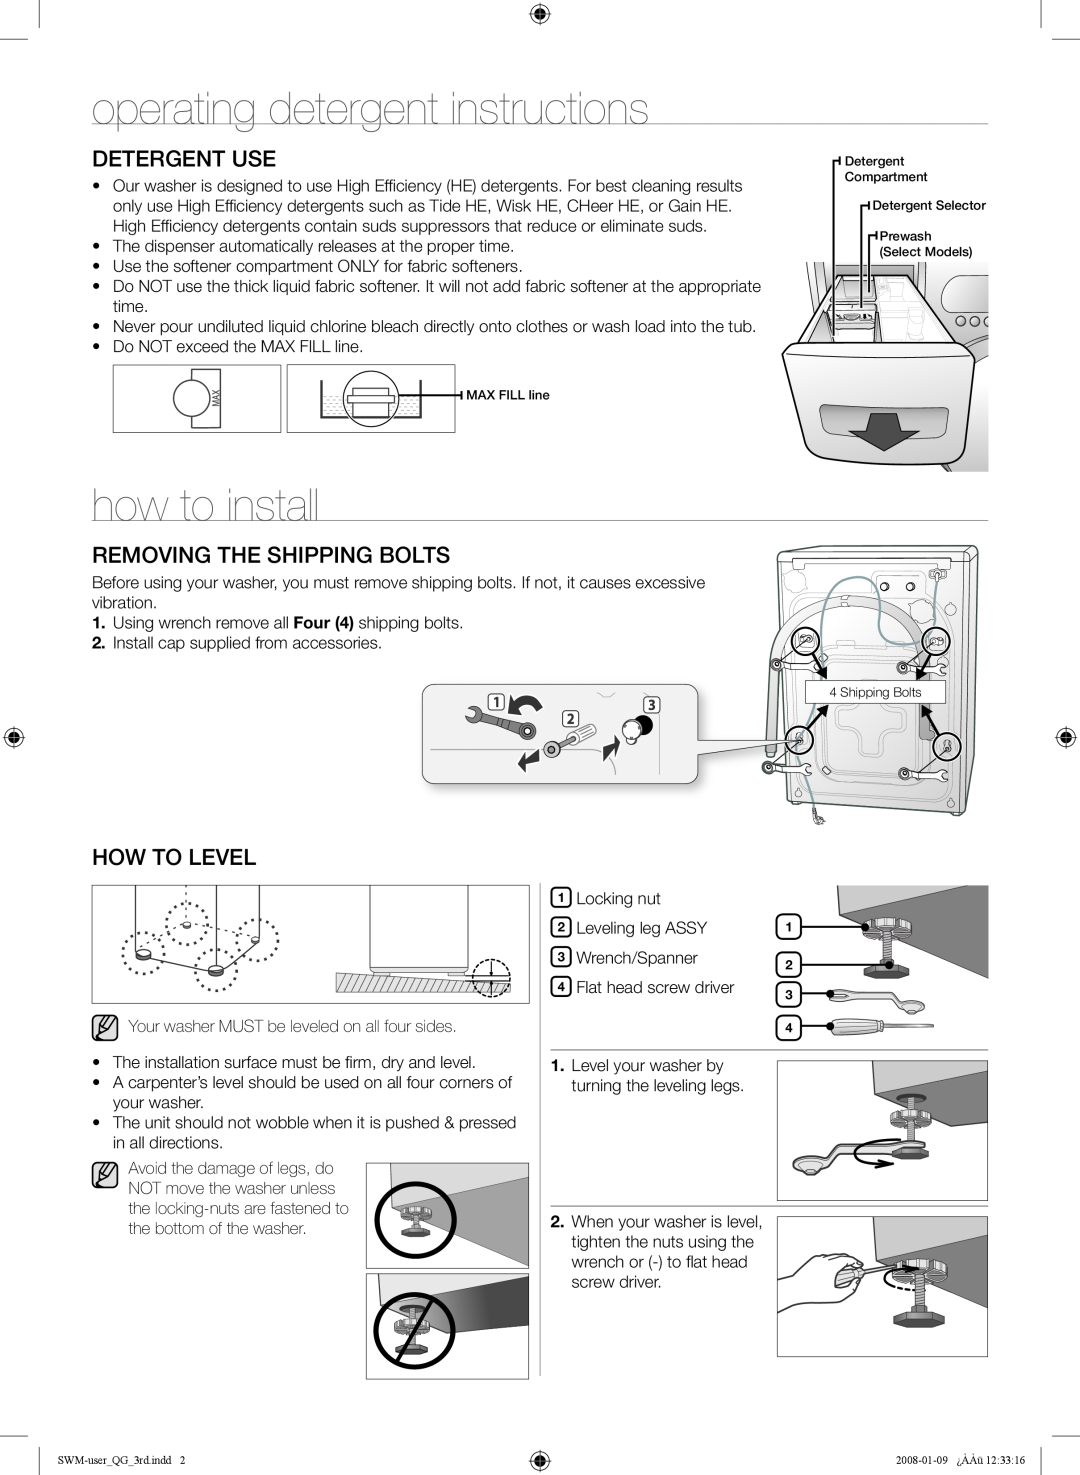 Samsung WD8704EJA/XEE manual operating detergent instructions, how to install, Detergent Use, Removing The Shipping Bolts 